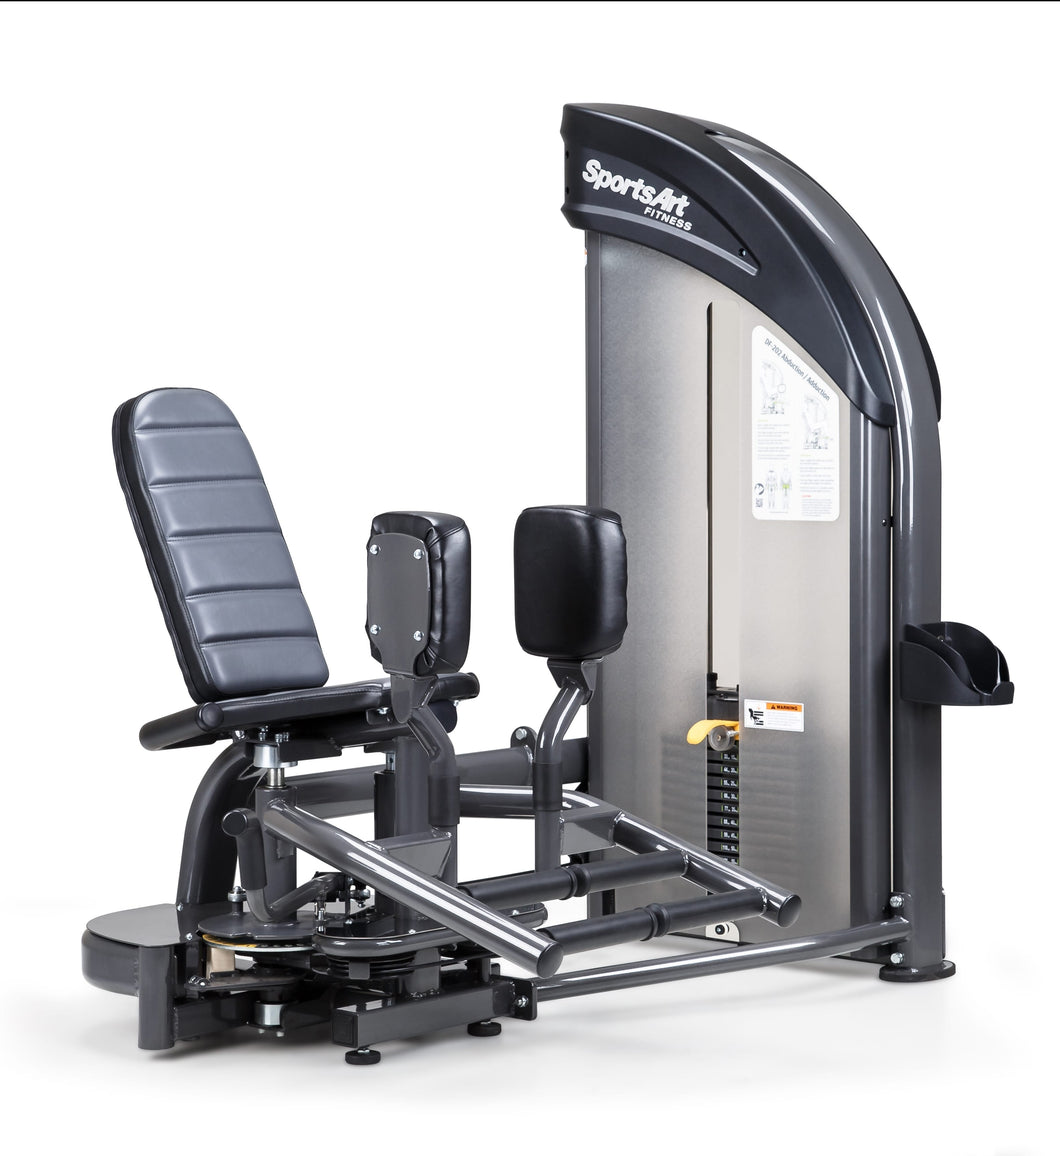 SportsArt DF202 Dual Function Abductor Adductor Machine